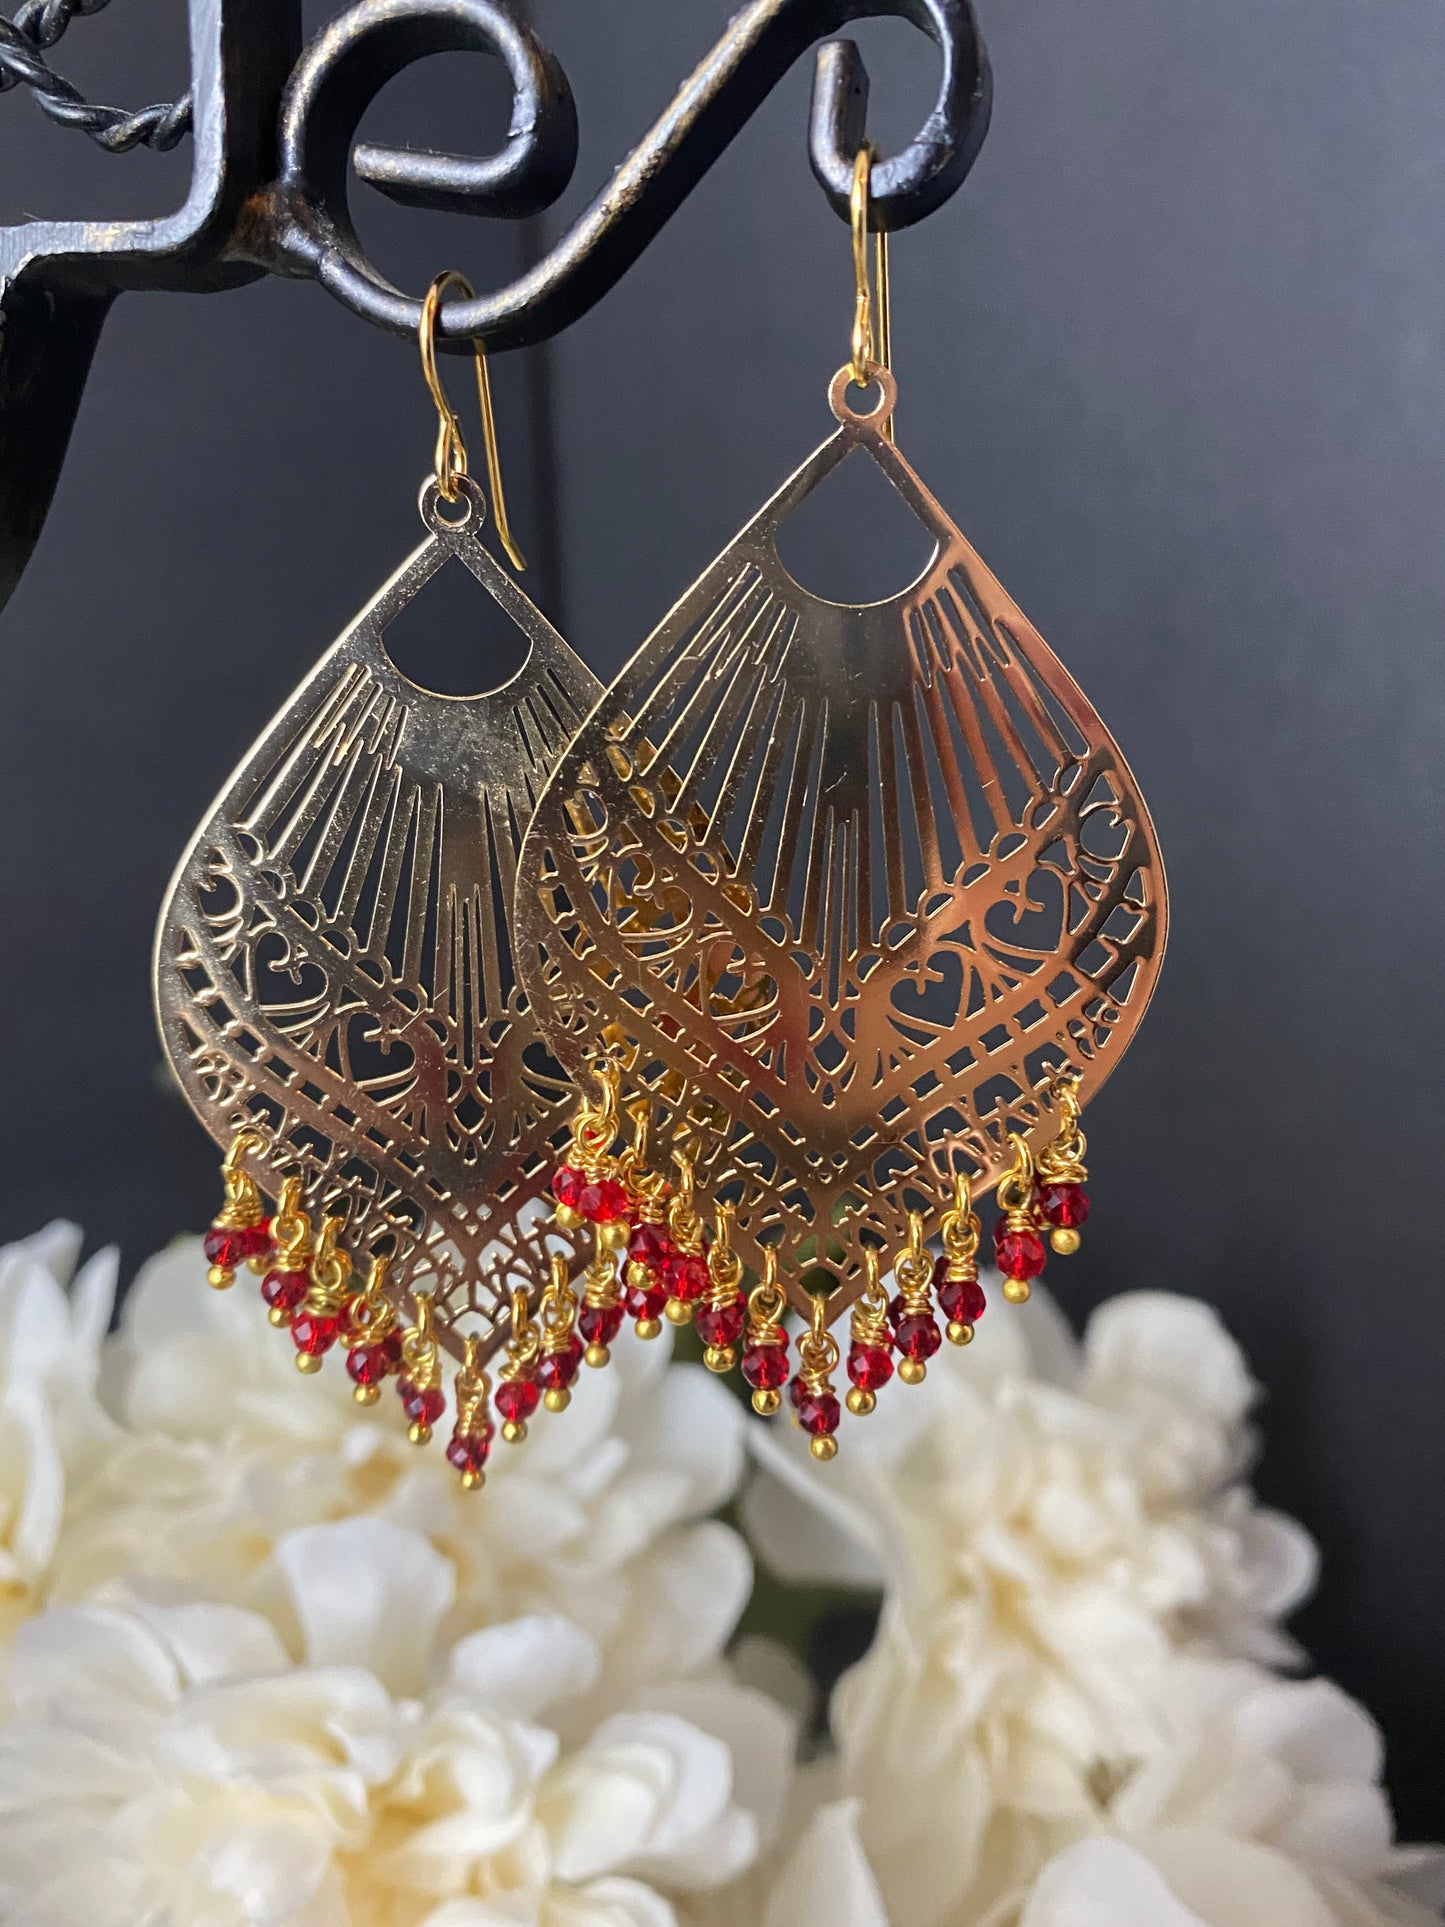 Heart chandeliers. red crystals, heart charm, gold metal earrings